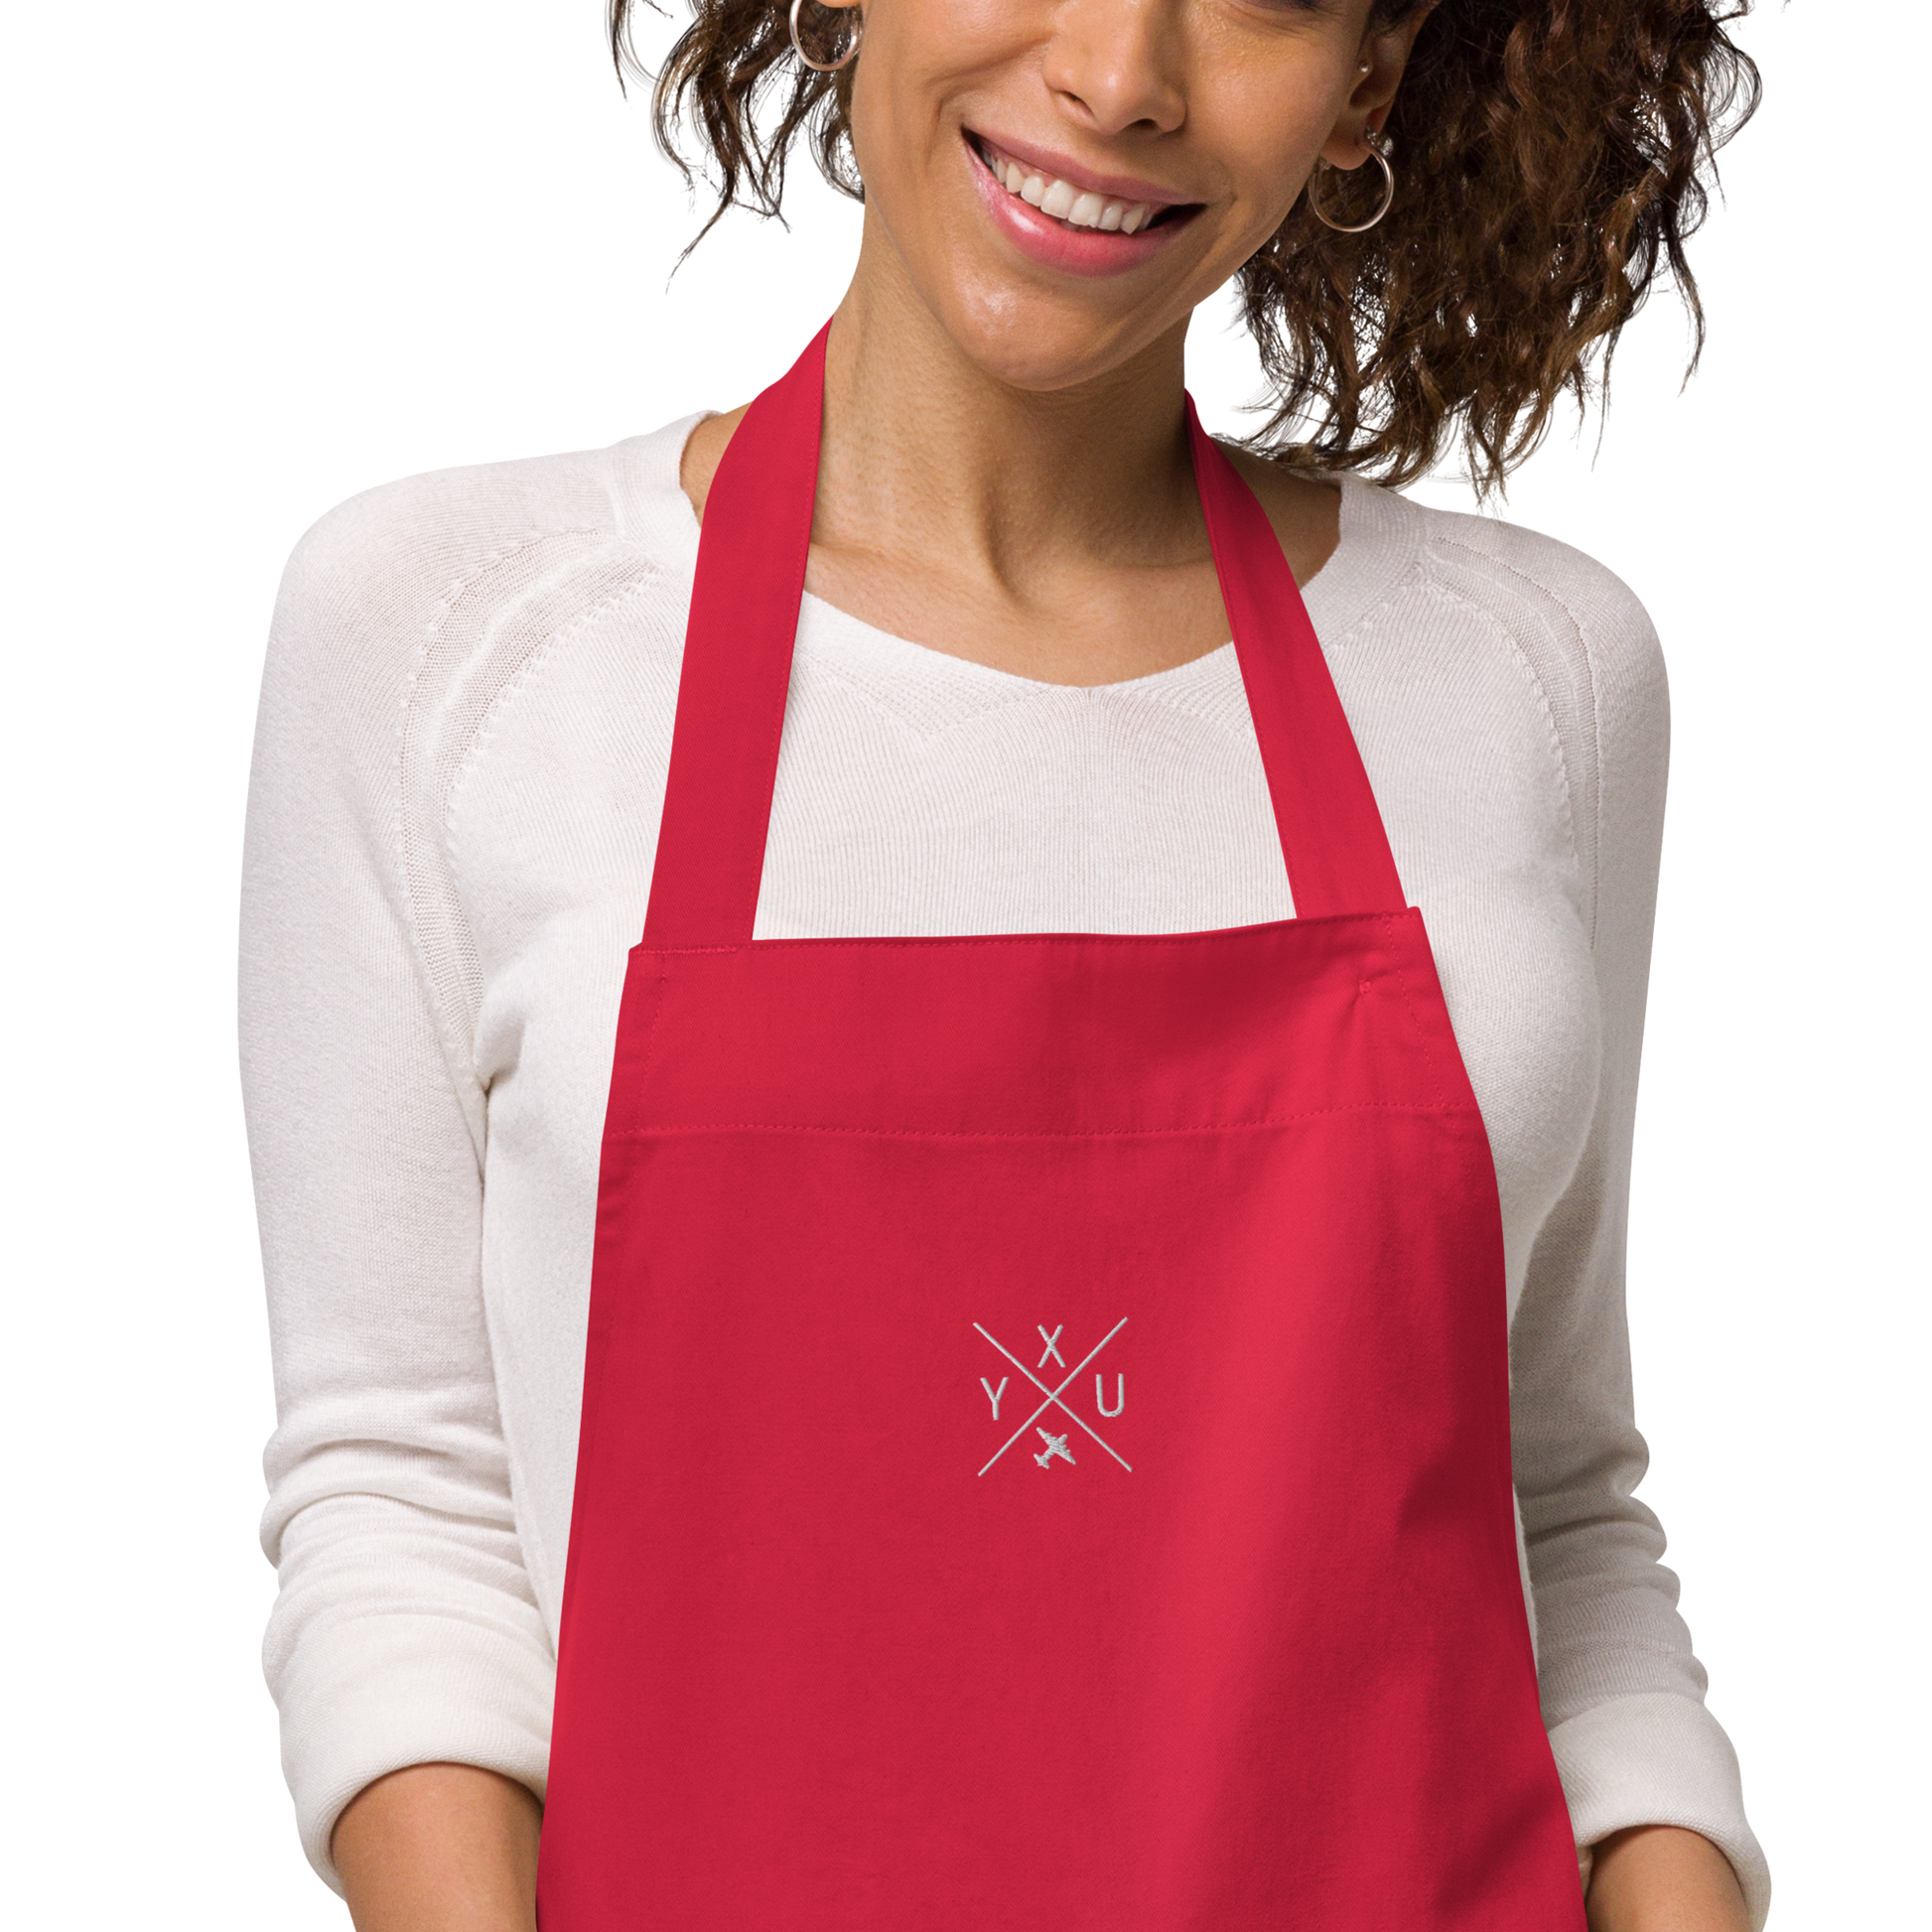 YHM Designs - YXU London Organic Cotton Apron - Crossed-X Design with Airport Code and Vintage Propliner - White Embroidery - Image 06